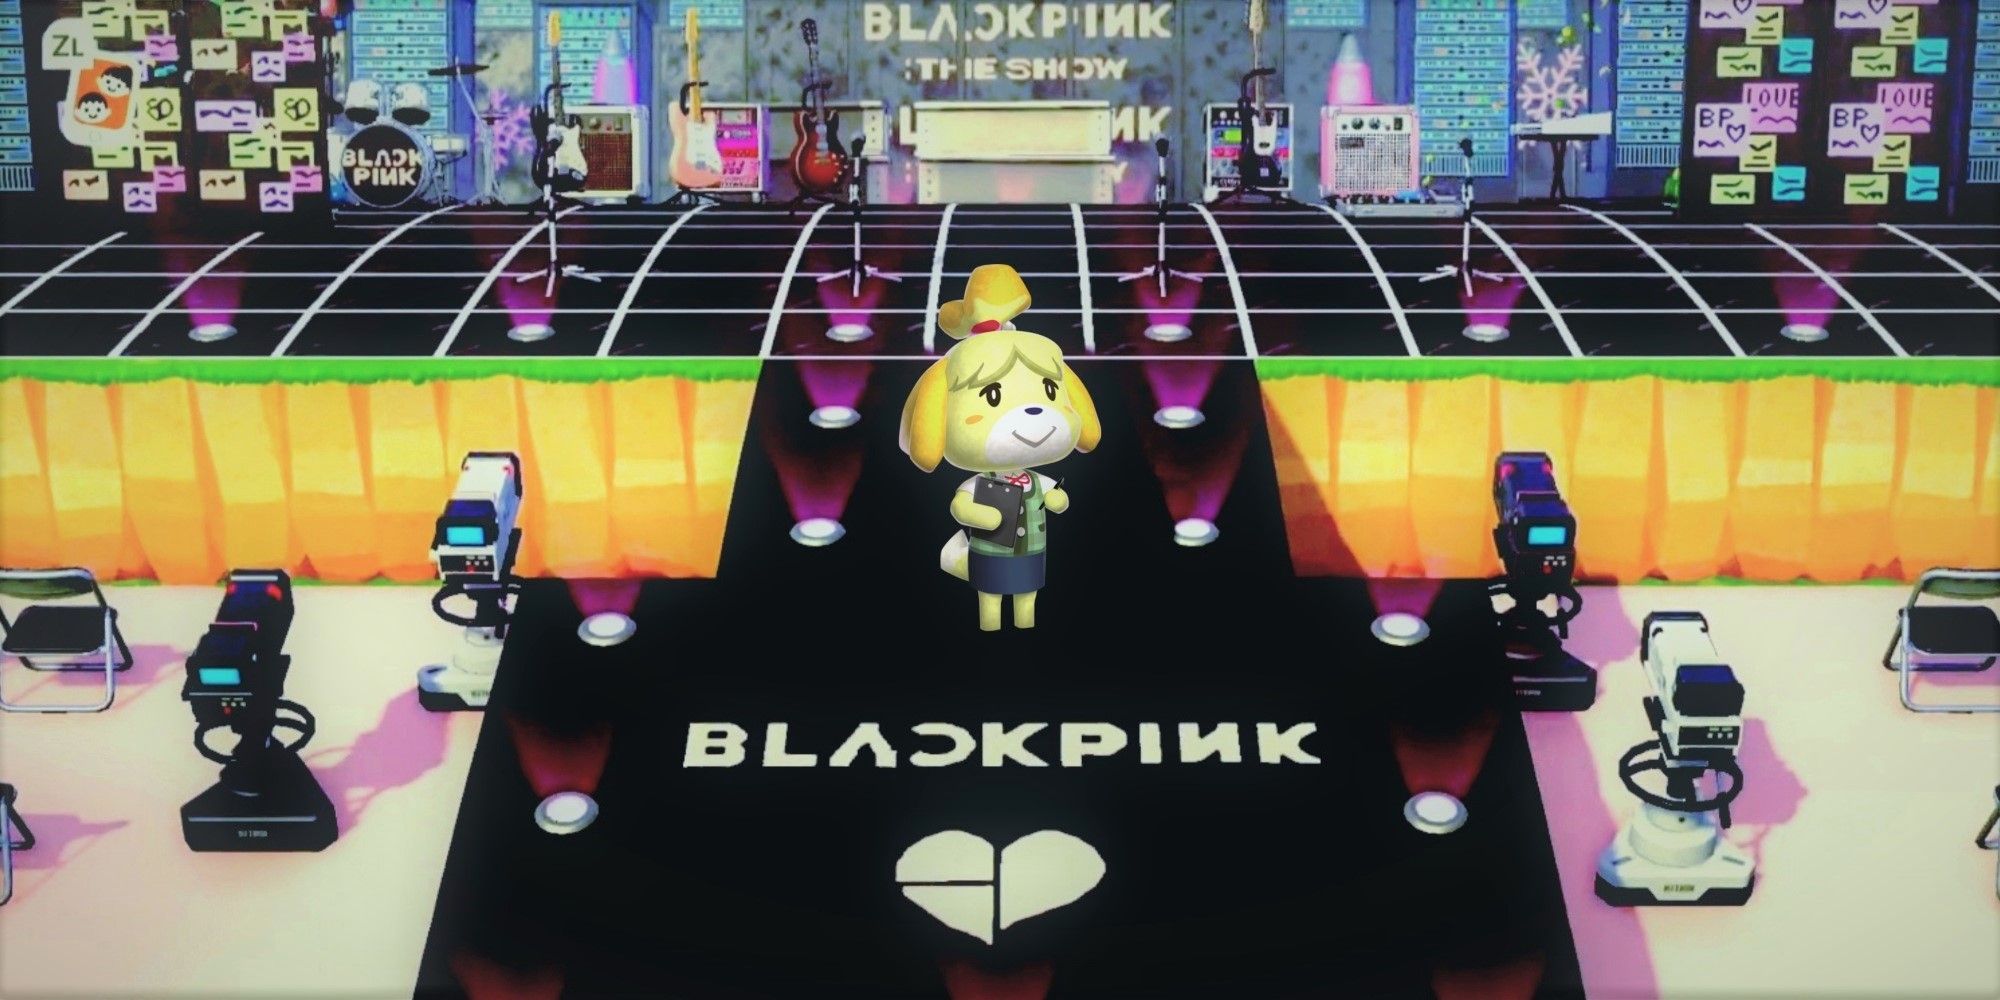 Animal Crossing: New Horizons' Isabelle standing on the concert stage of Blackpink's island